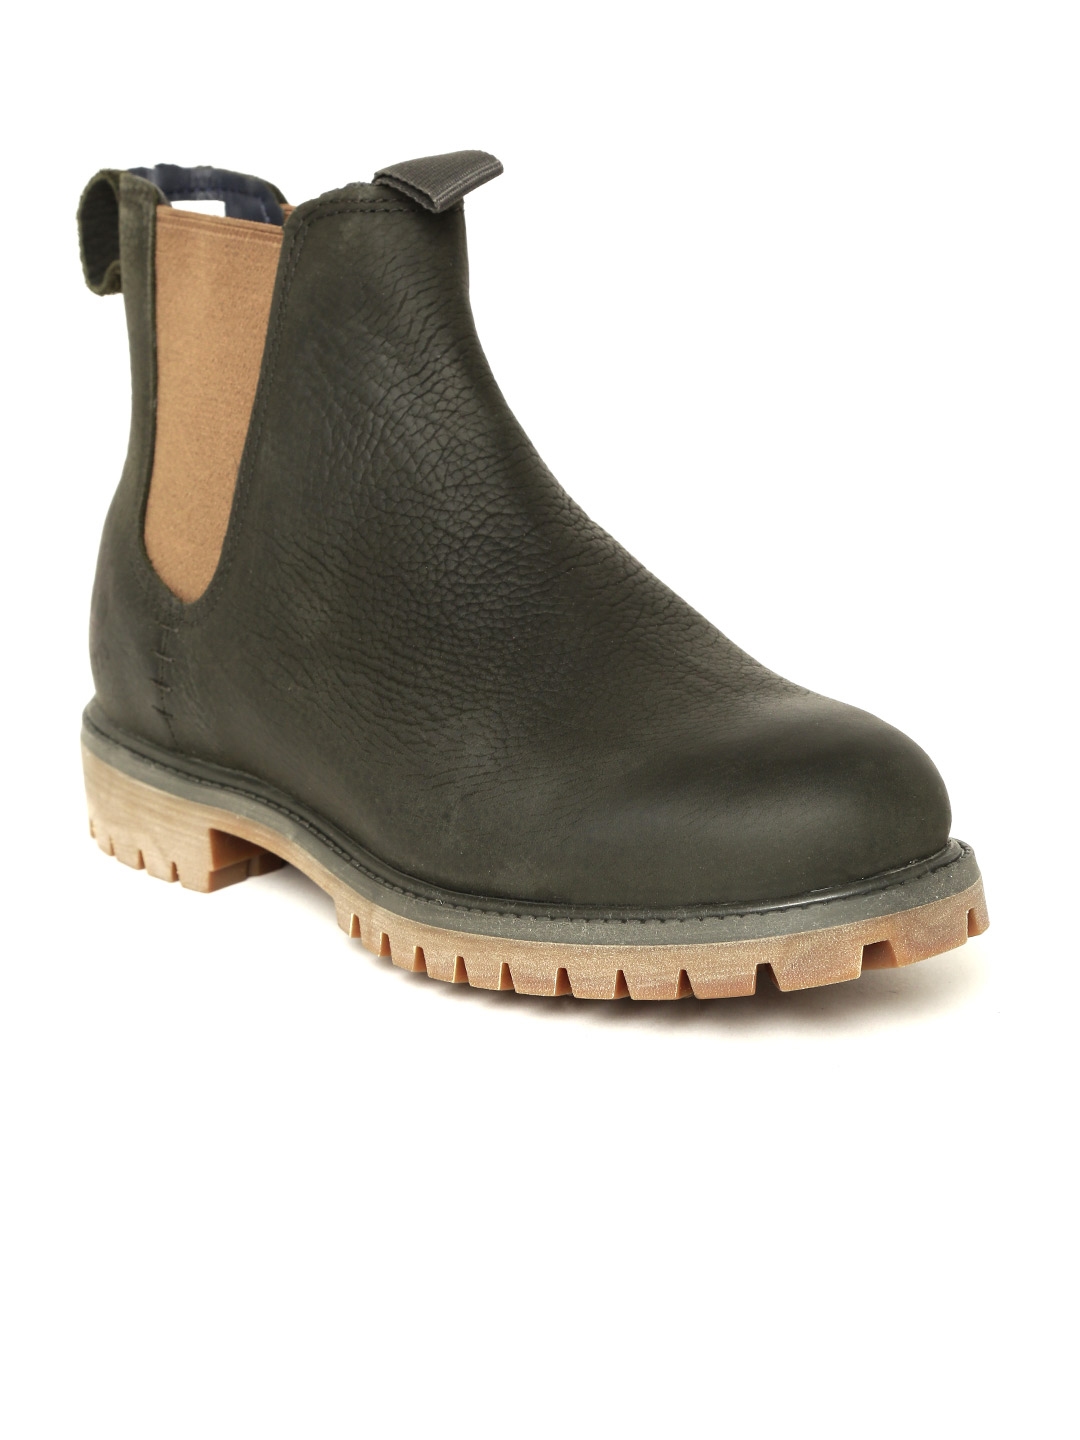 olive green chelsea boots mens